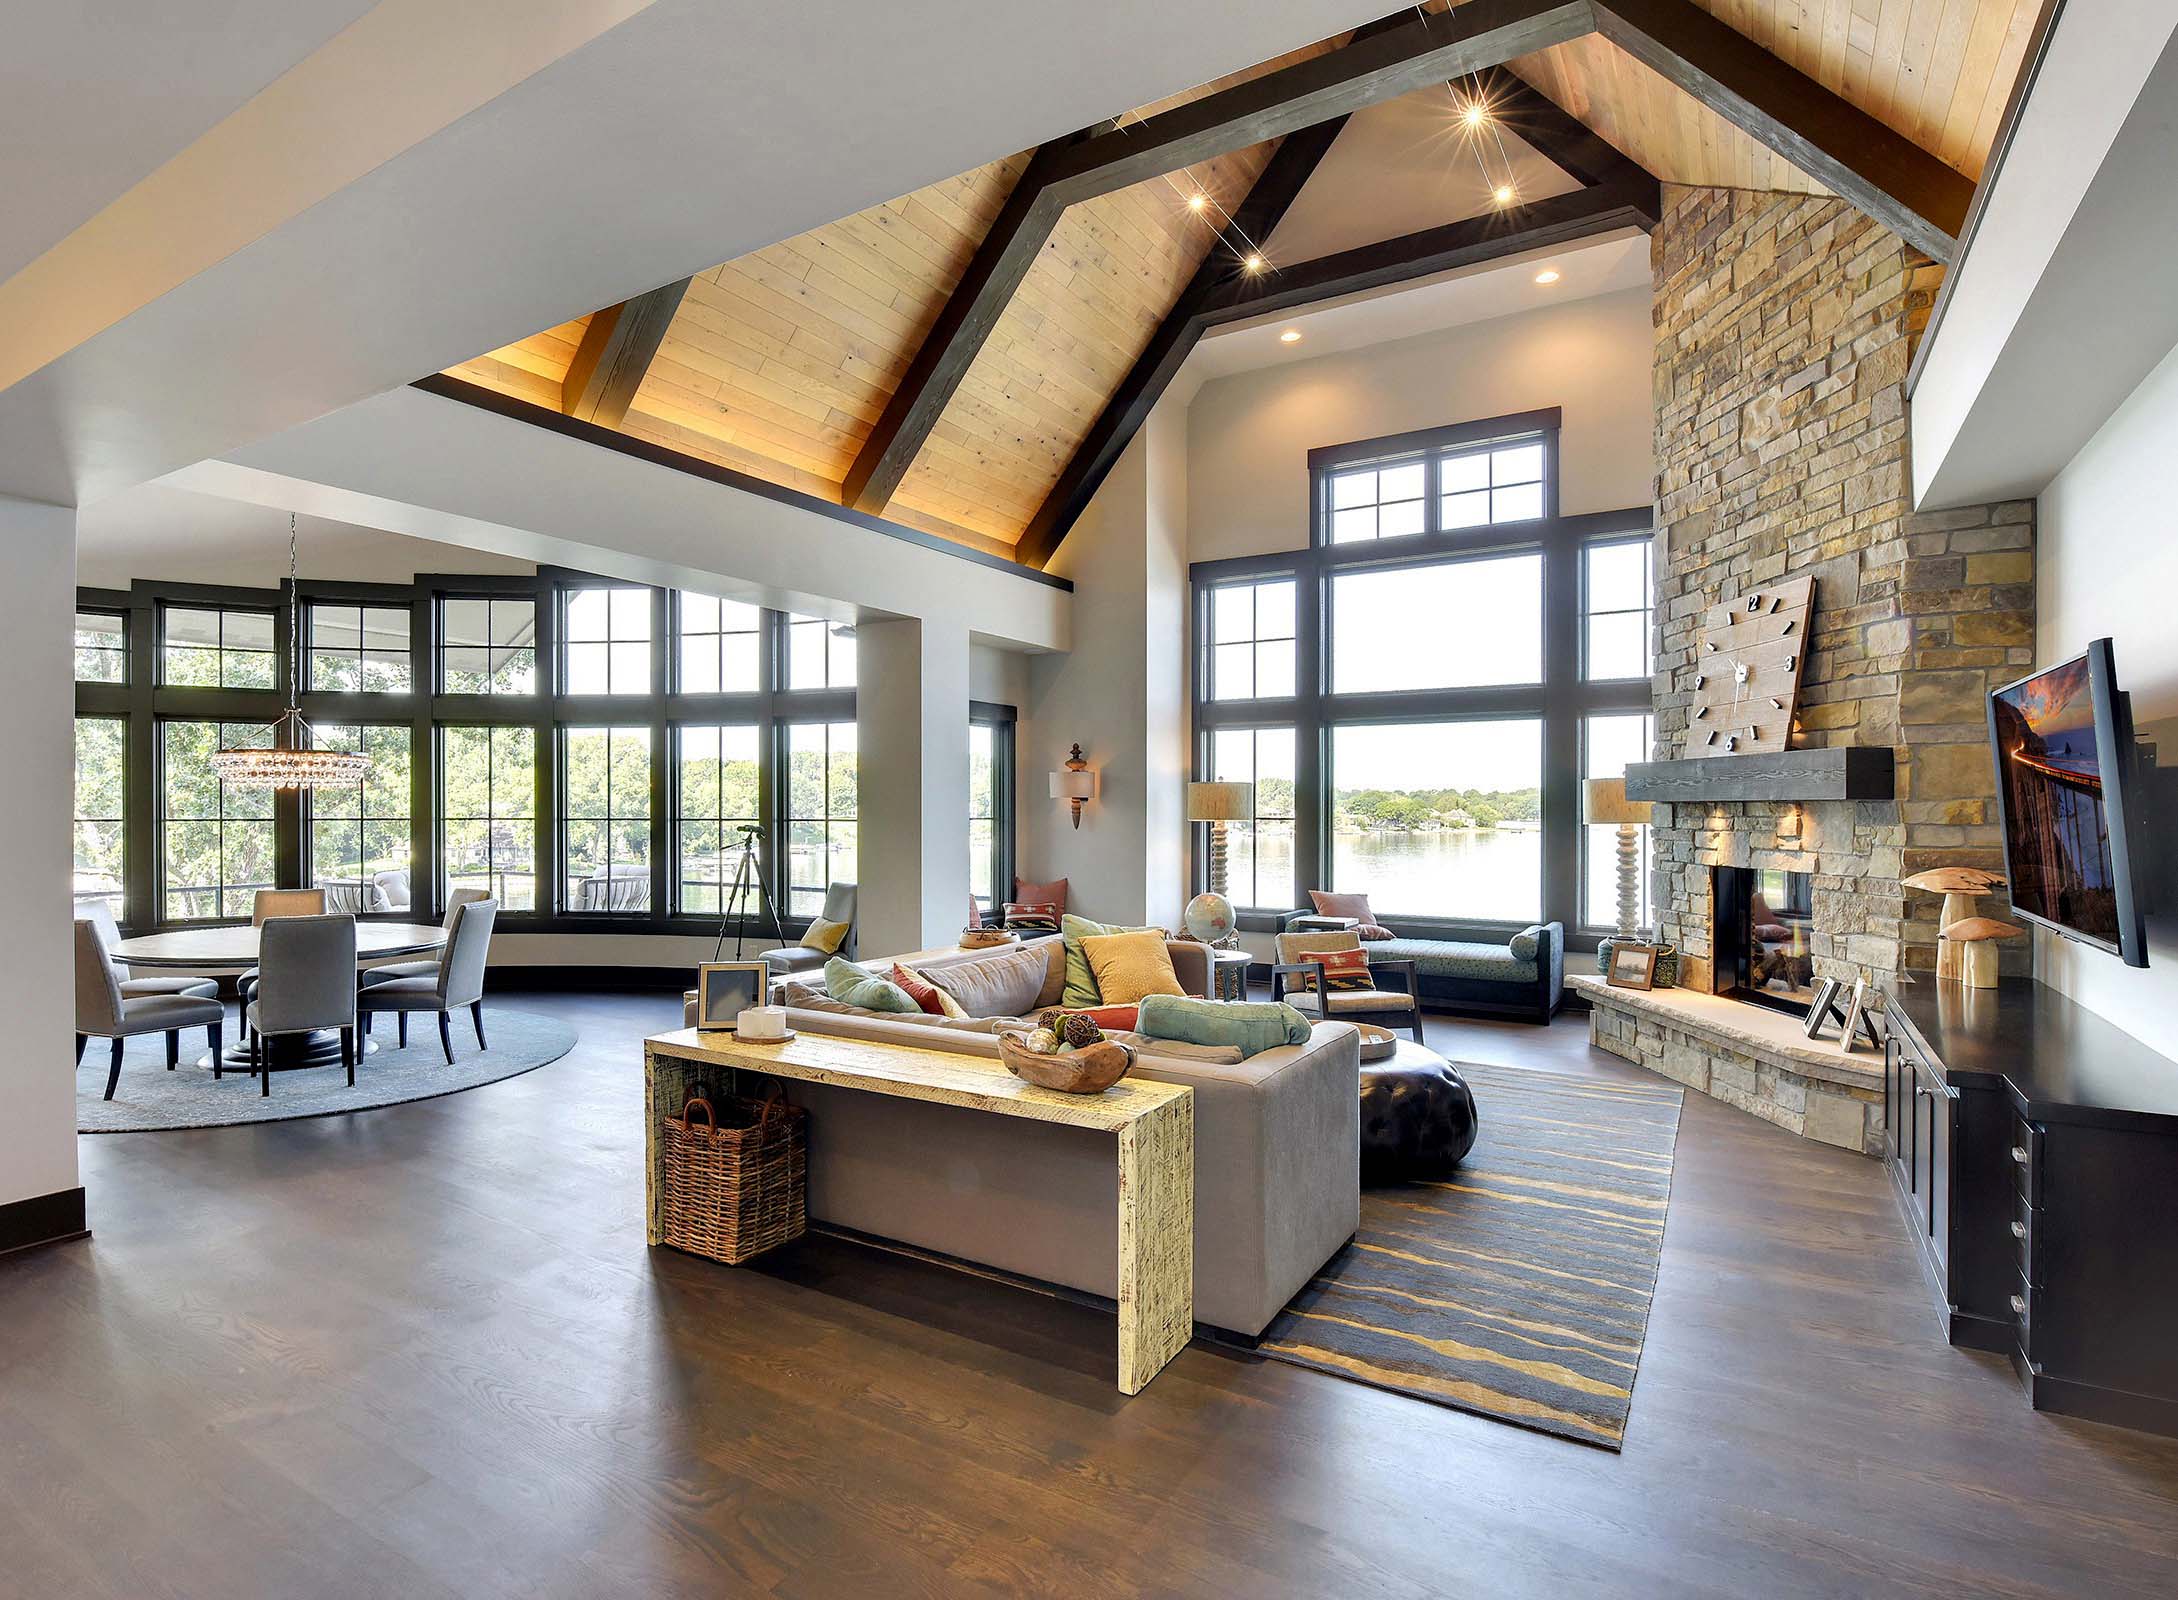 A large living room with wood beams and a fireplace.